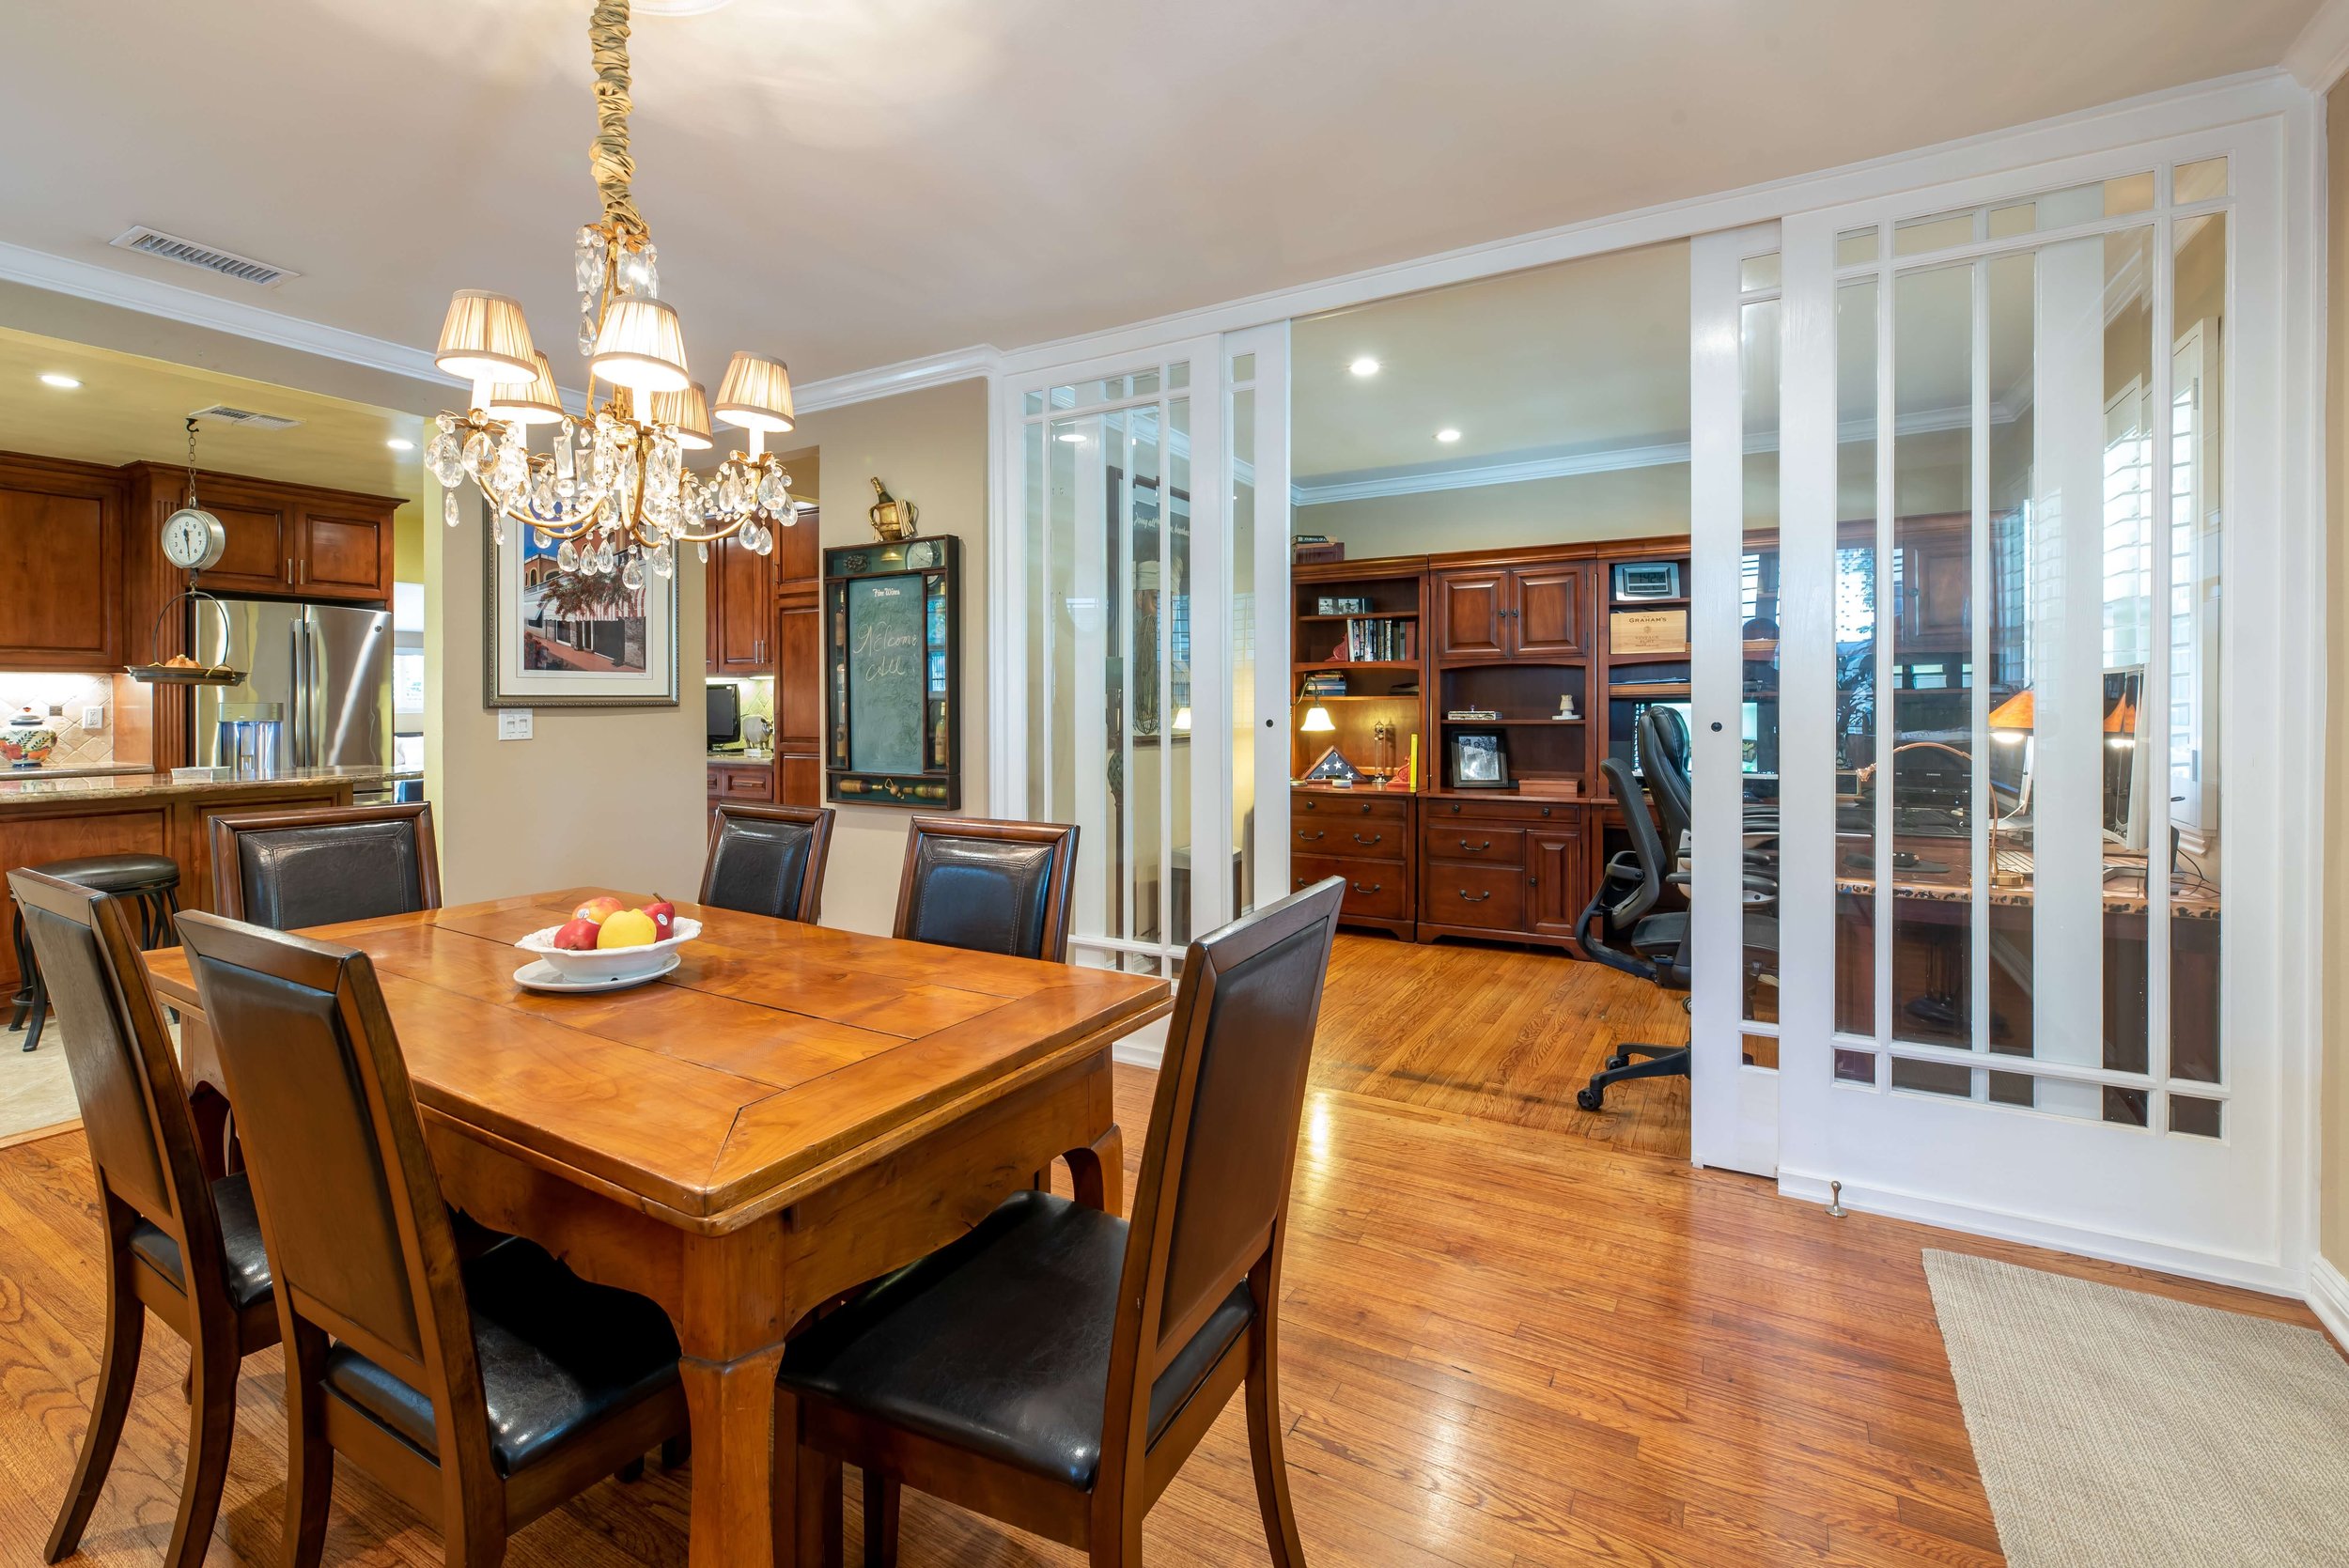 Real Estate Photography Dallas - Capture the Space You Want! — Dallas ...